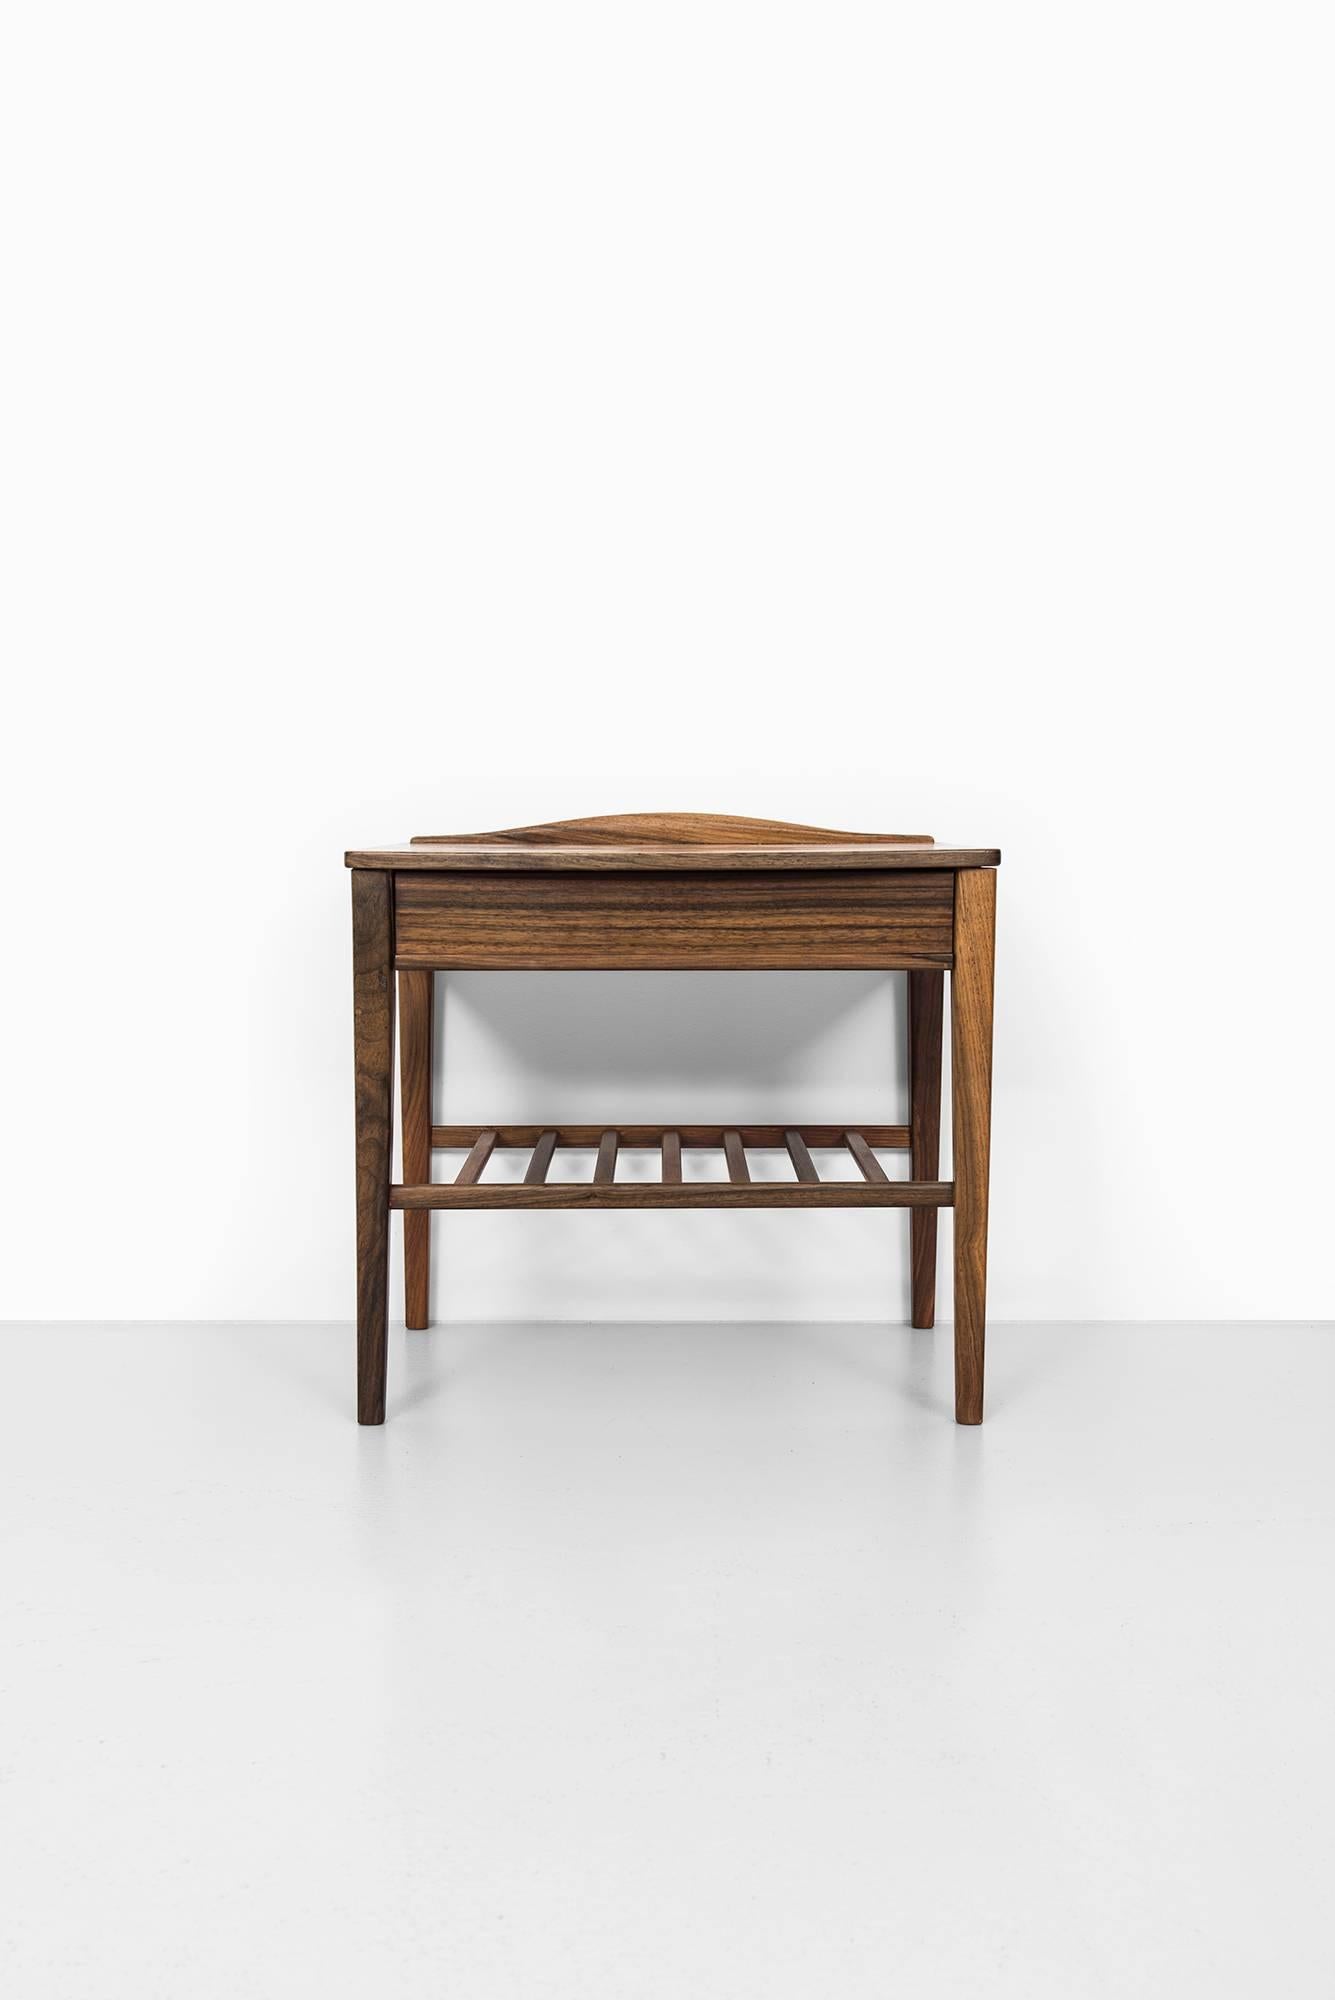 Danish Pair of Bedside Tables, High Quality, in Brazilian Rosewood